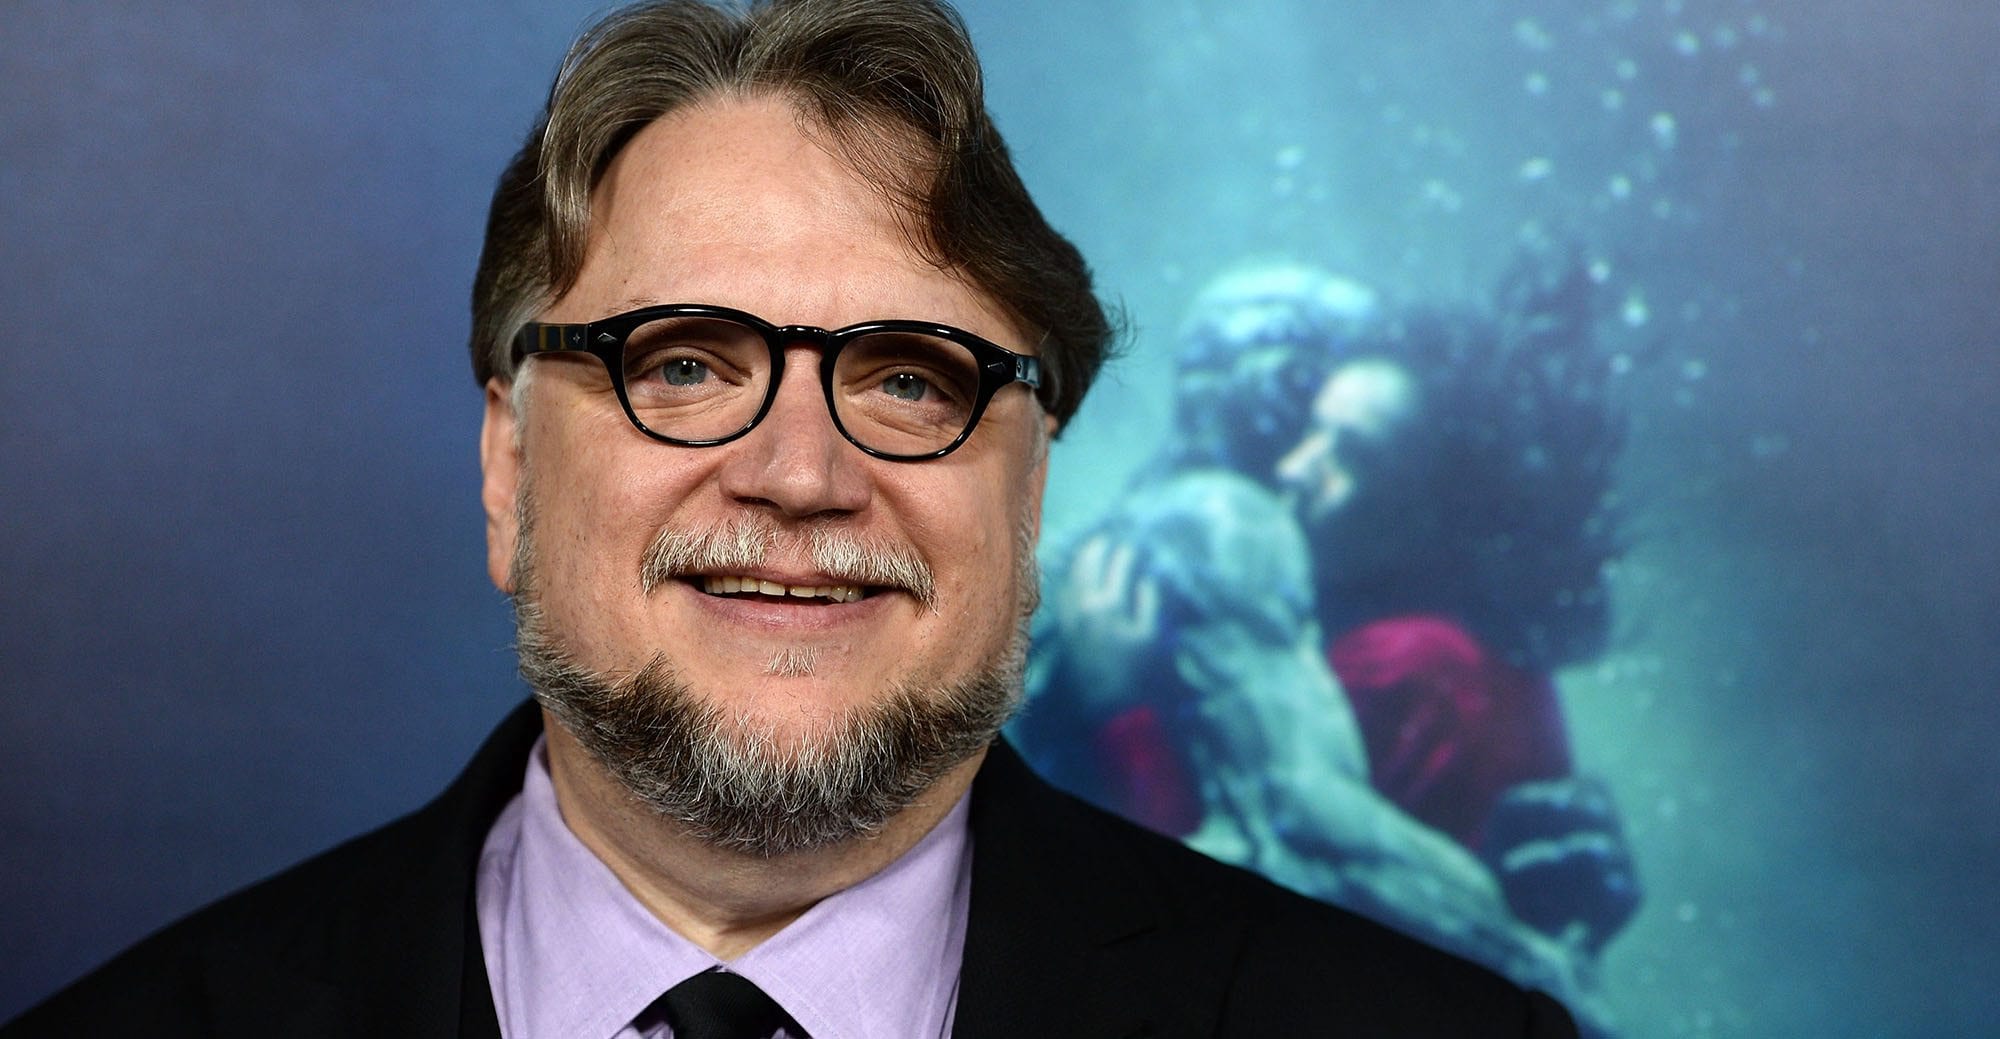 Guillermo del Toro has the magic touch on genre movies including 'Pan's Labyrinth'. Check his best films and shows he’s written, directed, and produced.